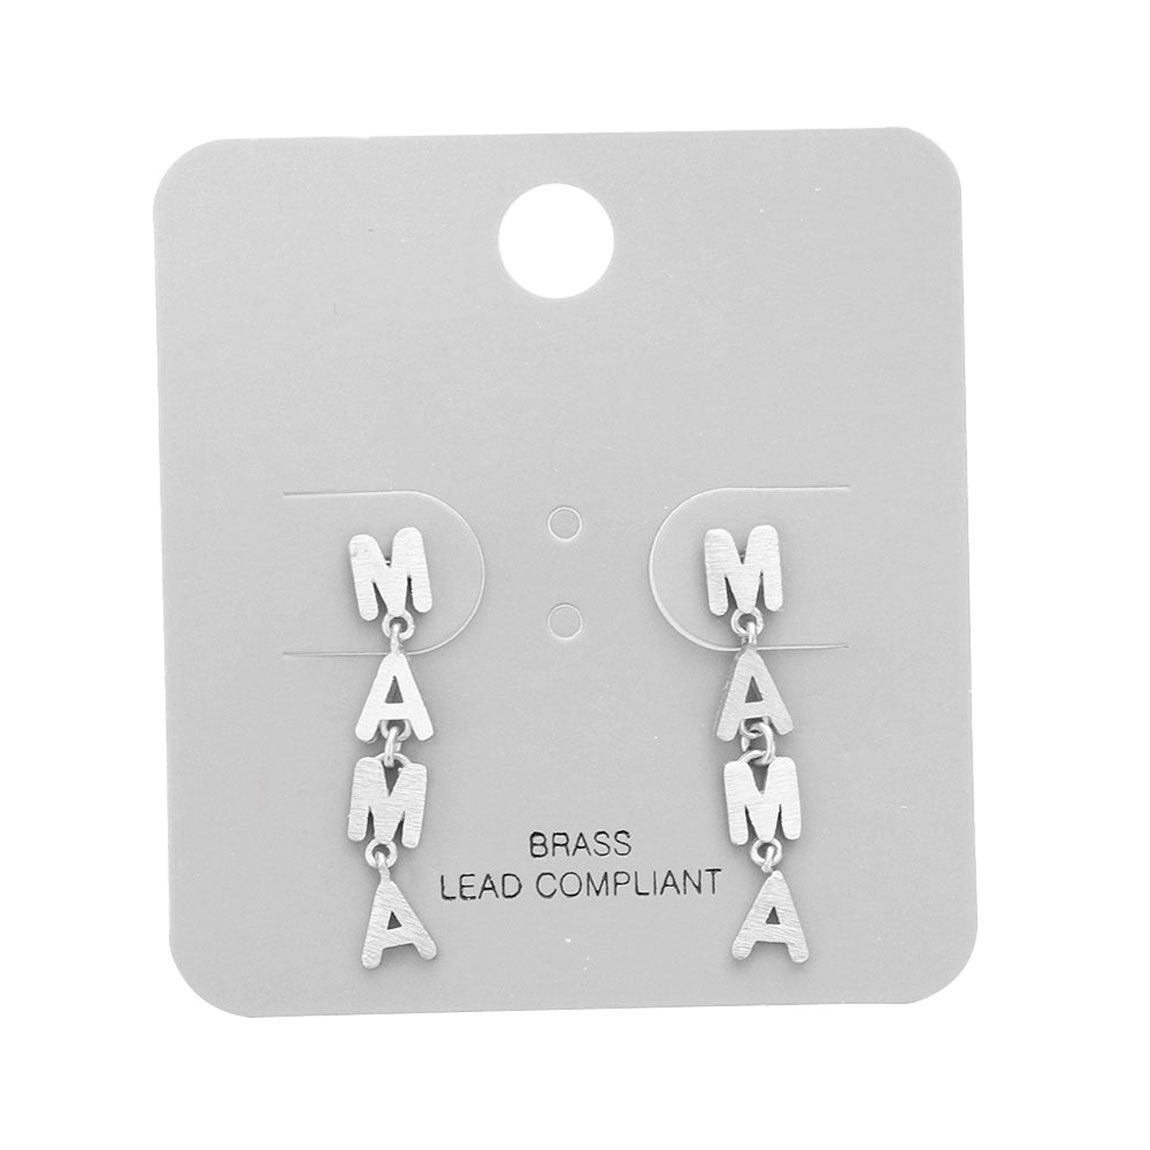 Rhodium Brass Metal Mama Link Earrings. Add just the right amount of shine and you’ve got a look that’s polished to perfection. The elegance of these dangle earrings goes unmatched, great for wearing at a party! Perfect jewelry to enhance your look. Awesome gift for birthday, Anniversary or any special occasion 